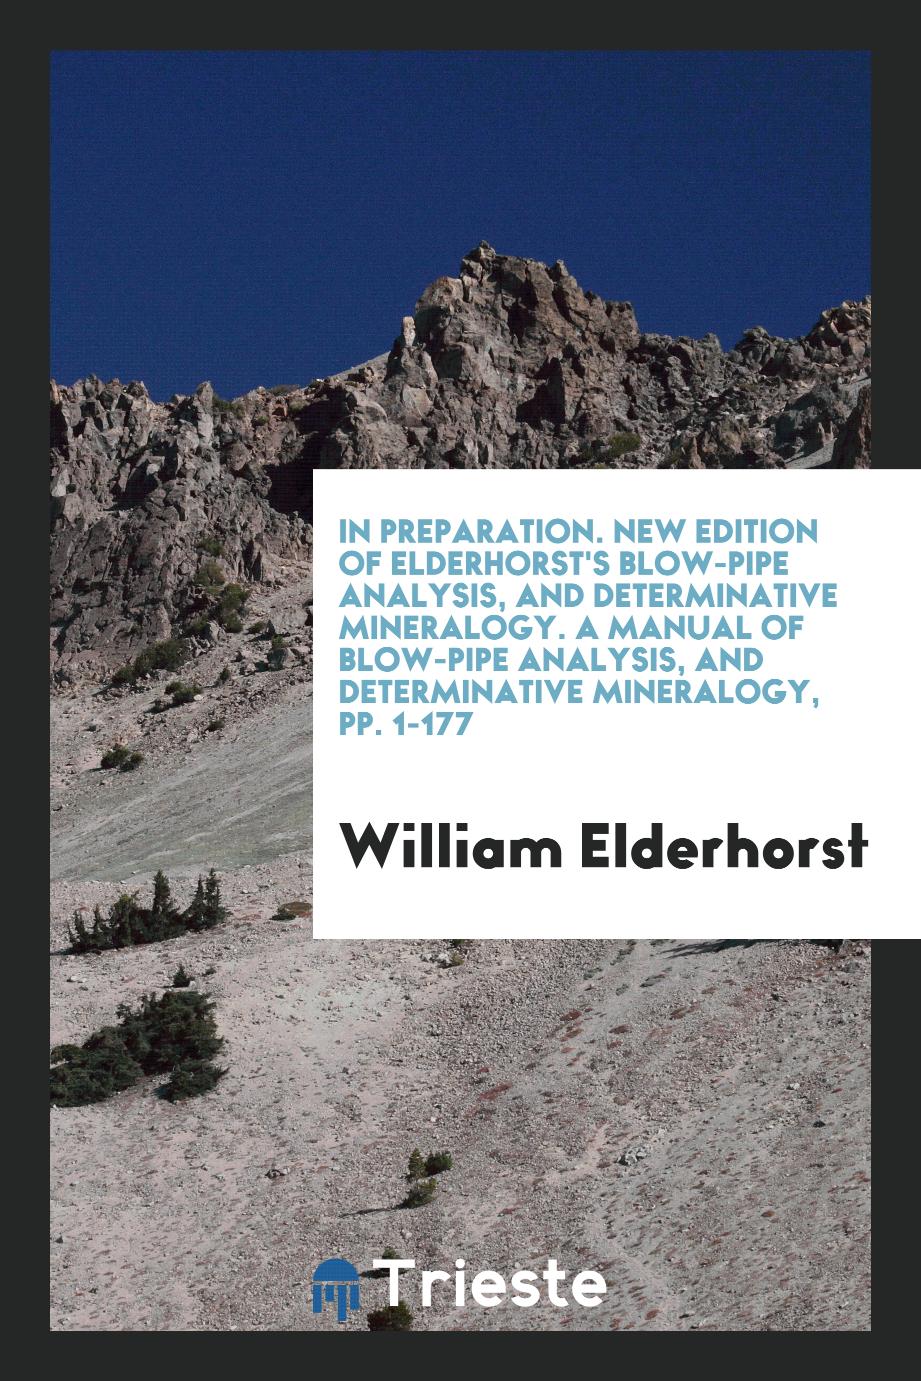 In Preparation. New Edition of Elderhorst's Blow-Pipe Analysis, and Determinative Mineralogy. A Manual of Blow-Pipe Analysis, and Determinative Mineralogy, pp. 1-177